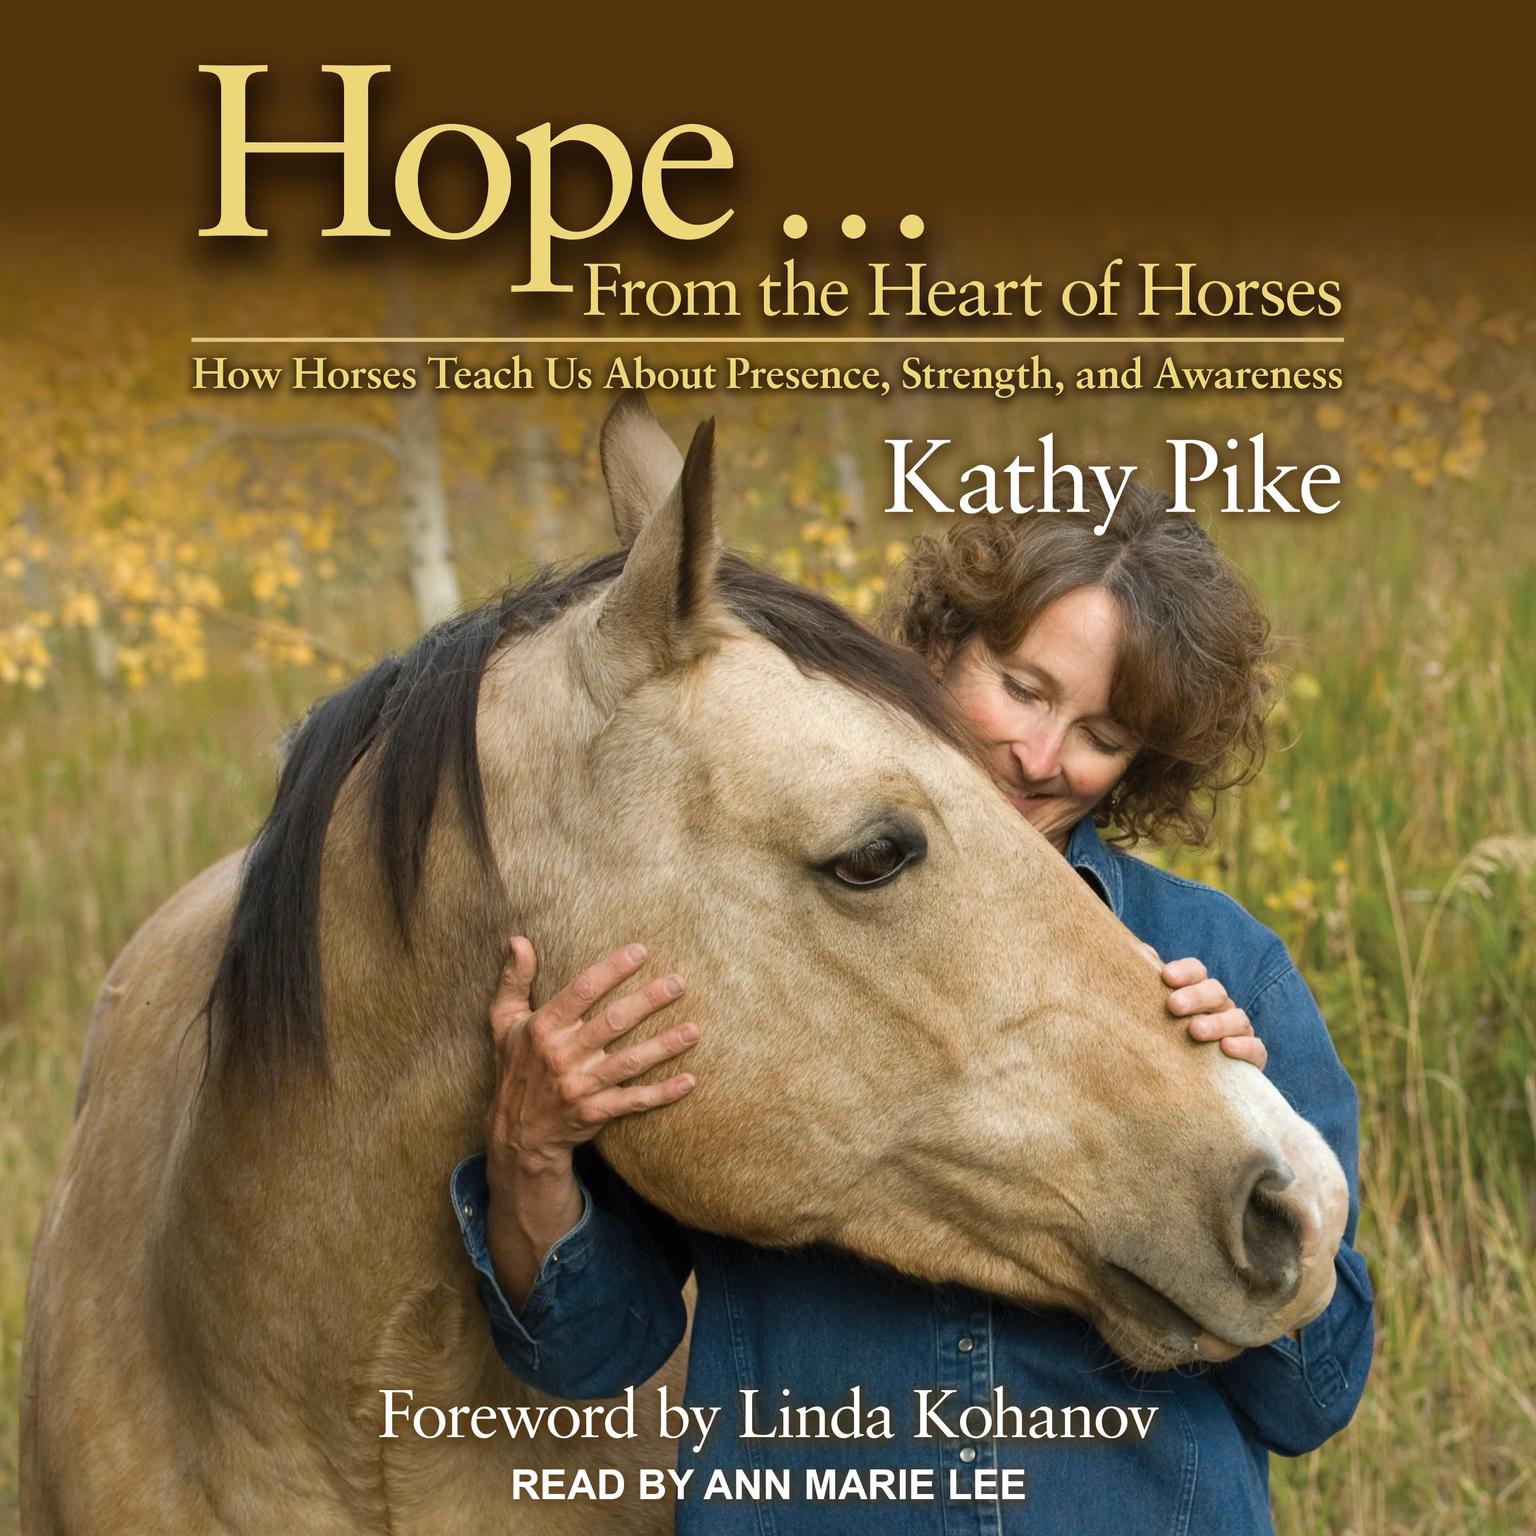 Hope . . . From the Heart of Horses: How Horses Teach Us About Presence, Strength, and Awareness Audiobook, by Kathy Pike